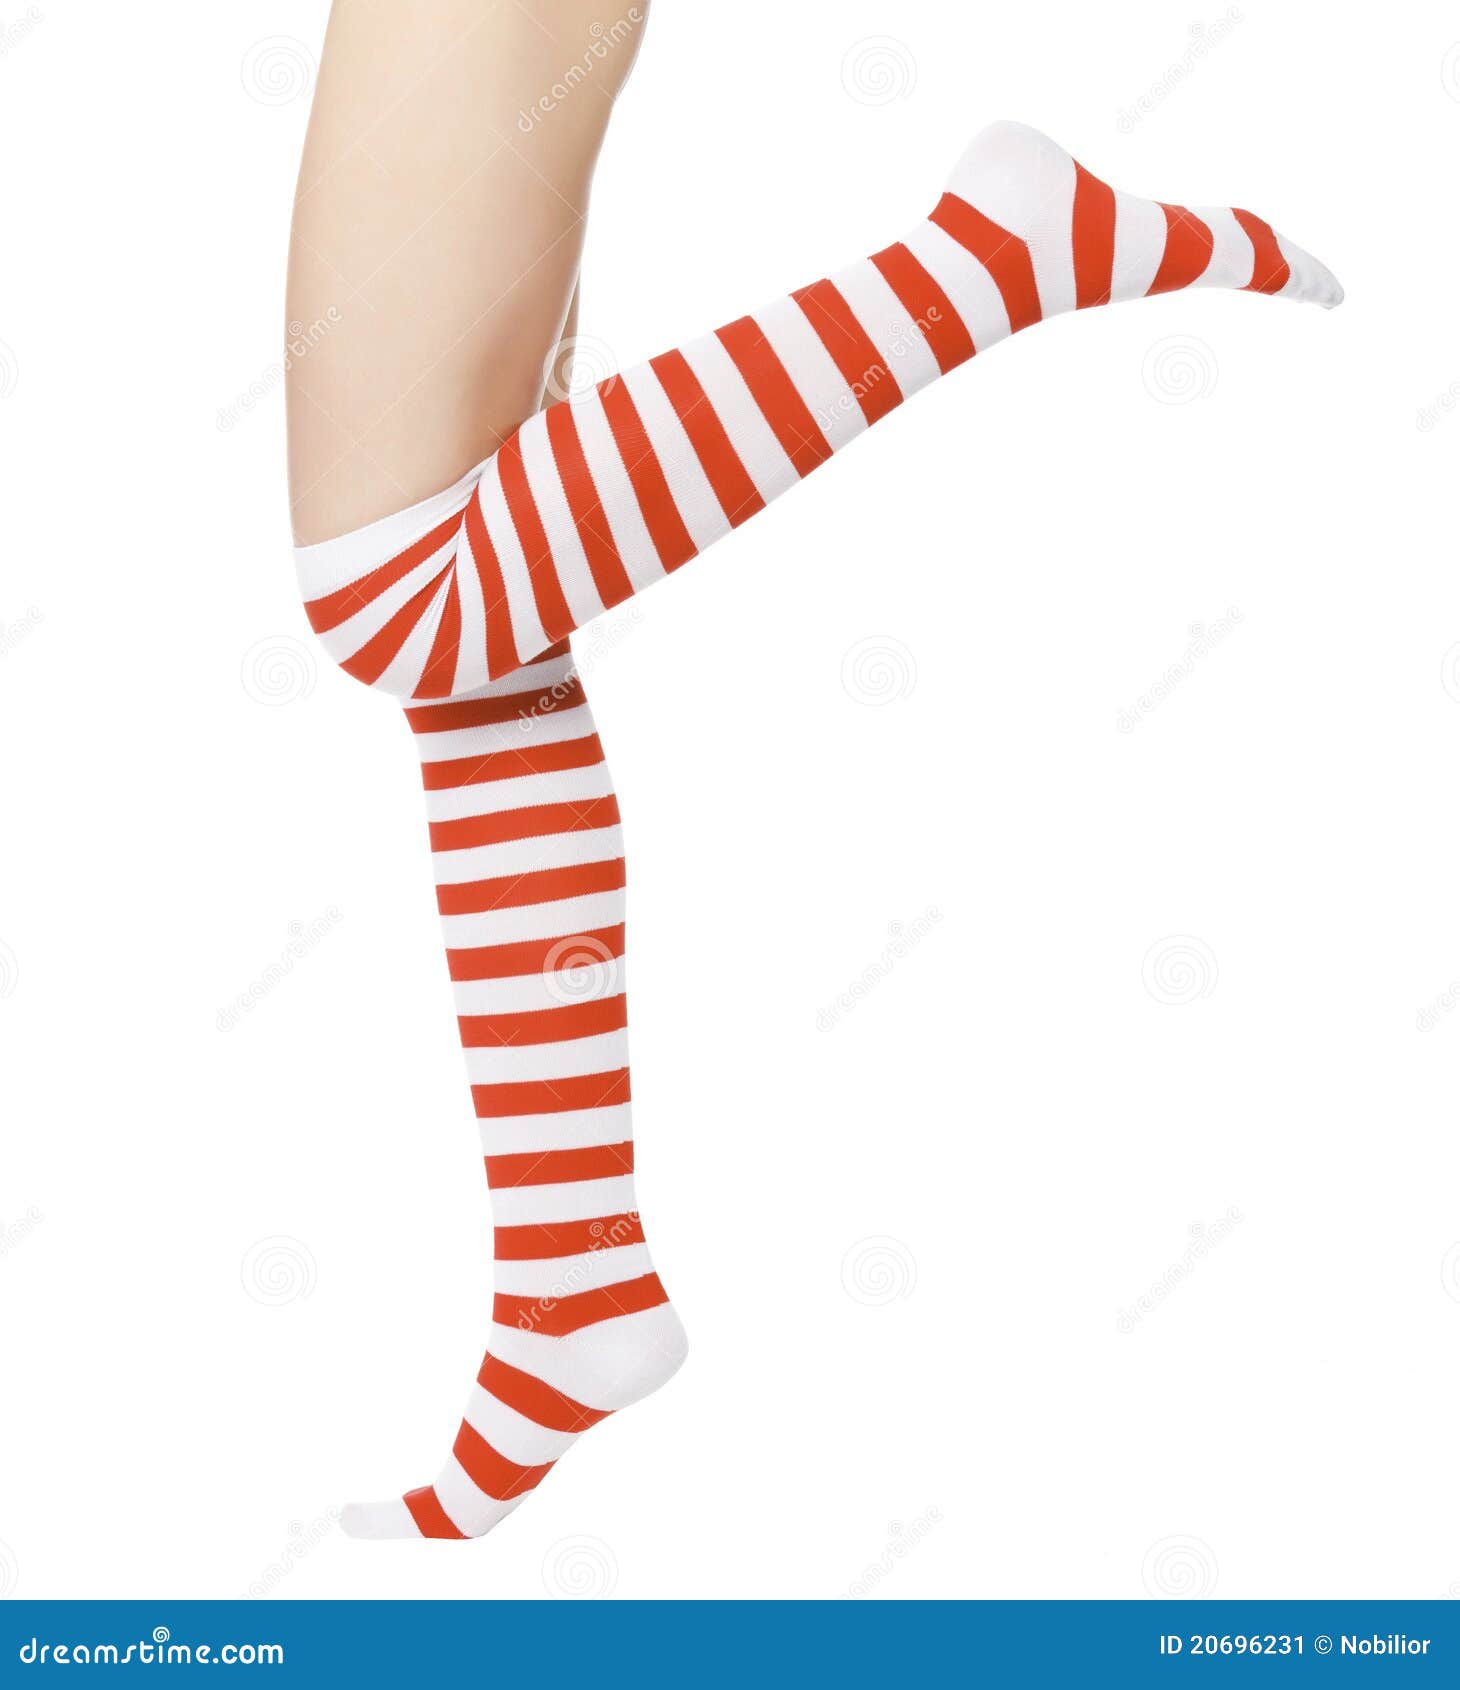 Legs in Red and White Socks Stock Image - Image of casual, female: 20696231